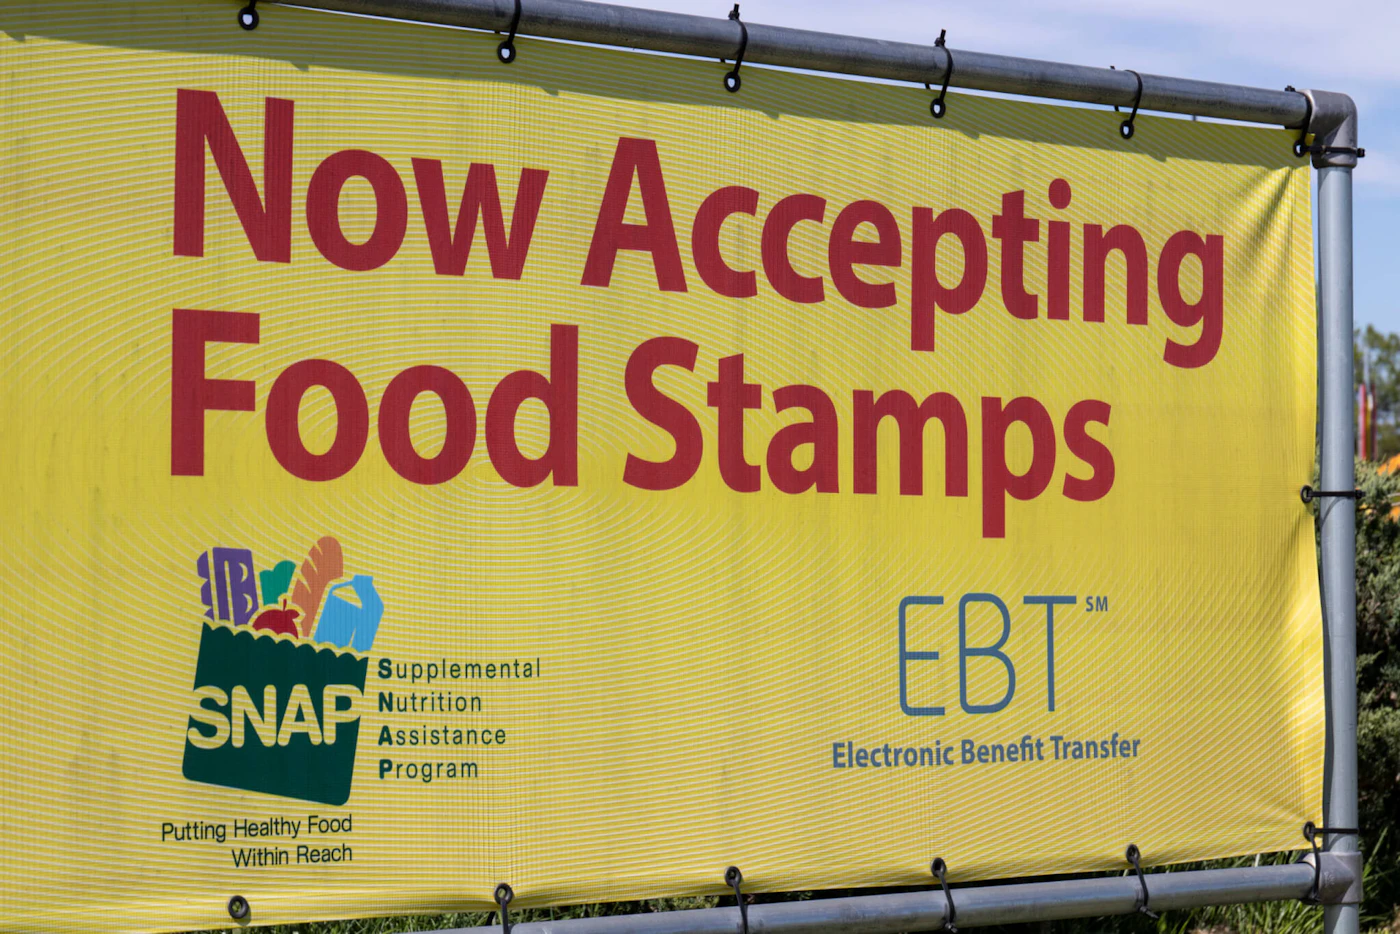 Terre Haute - Circa May 2020: SNAP and EBT Accepted here sign. SNAP and Food Stamps provide nutrition benefits to supplement the budgets of disadvantaged families.